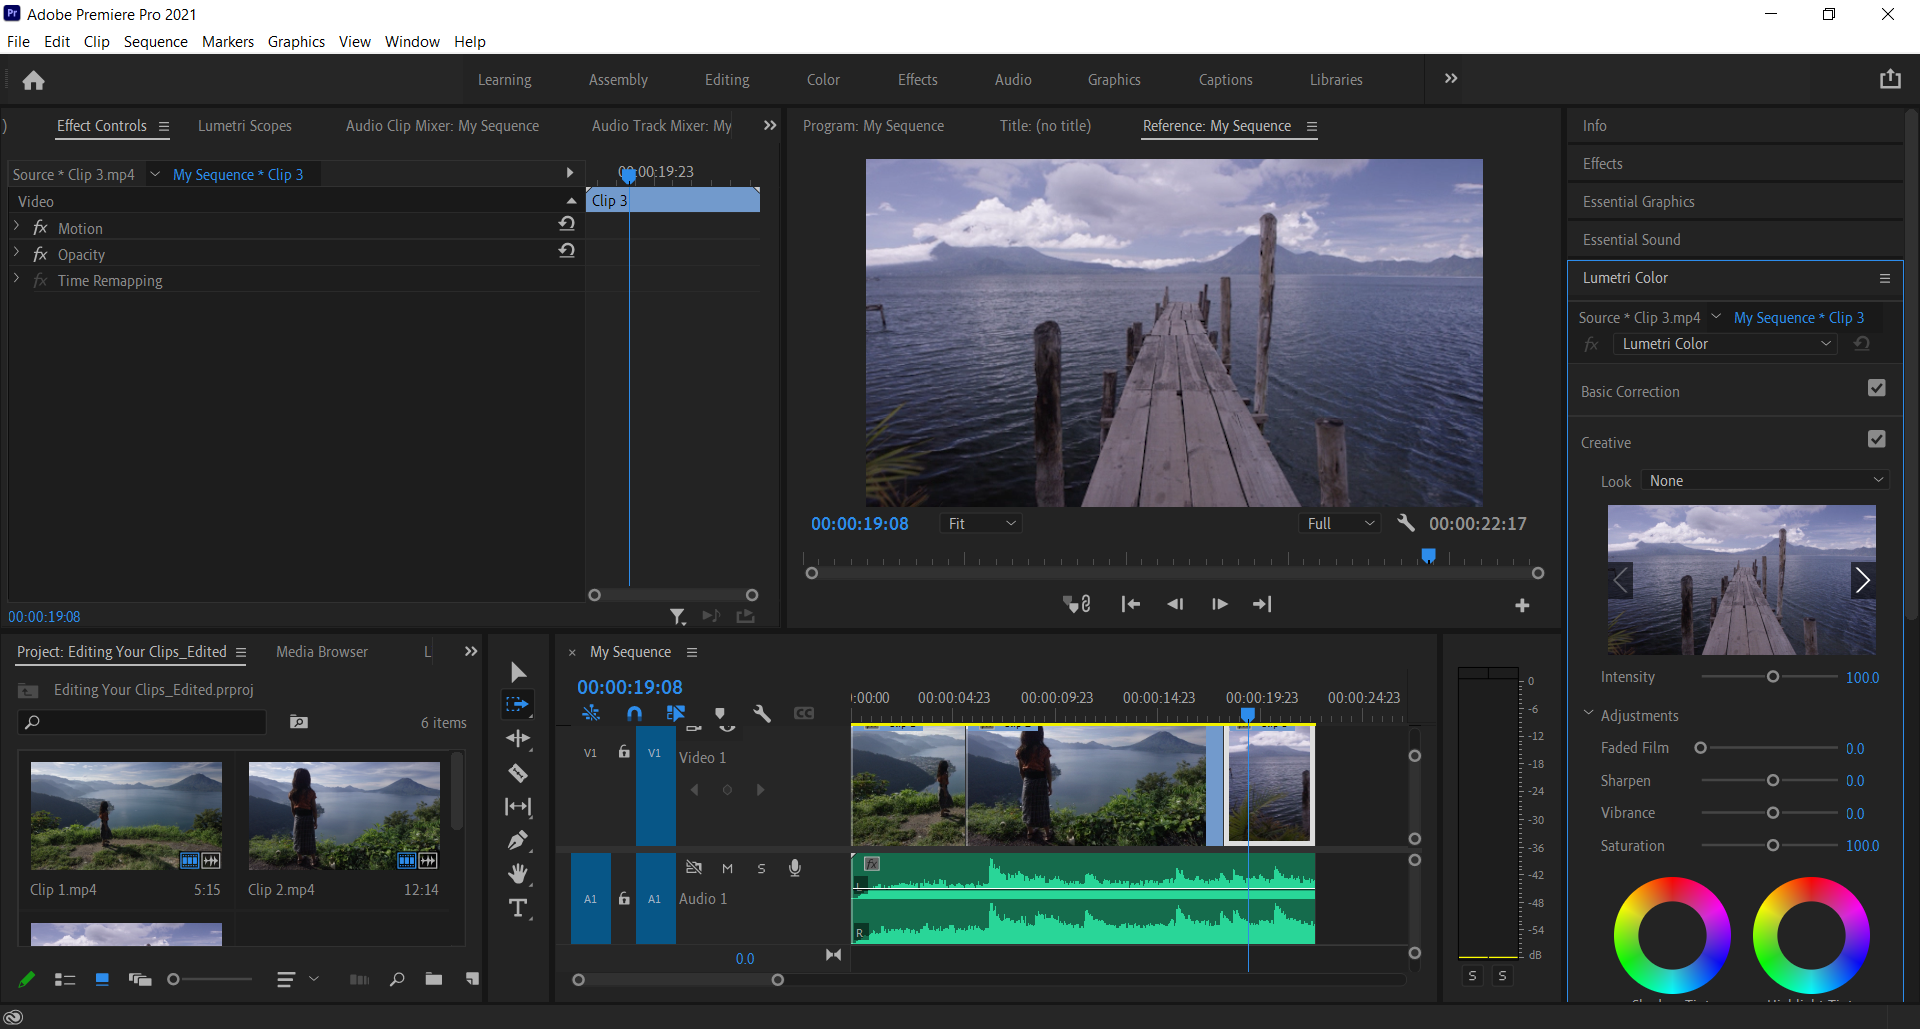 How to export Adobe Premiere to MP4 in few easy steps?